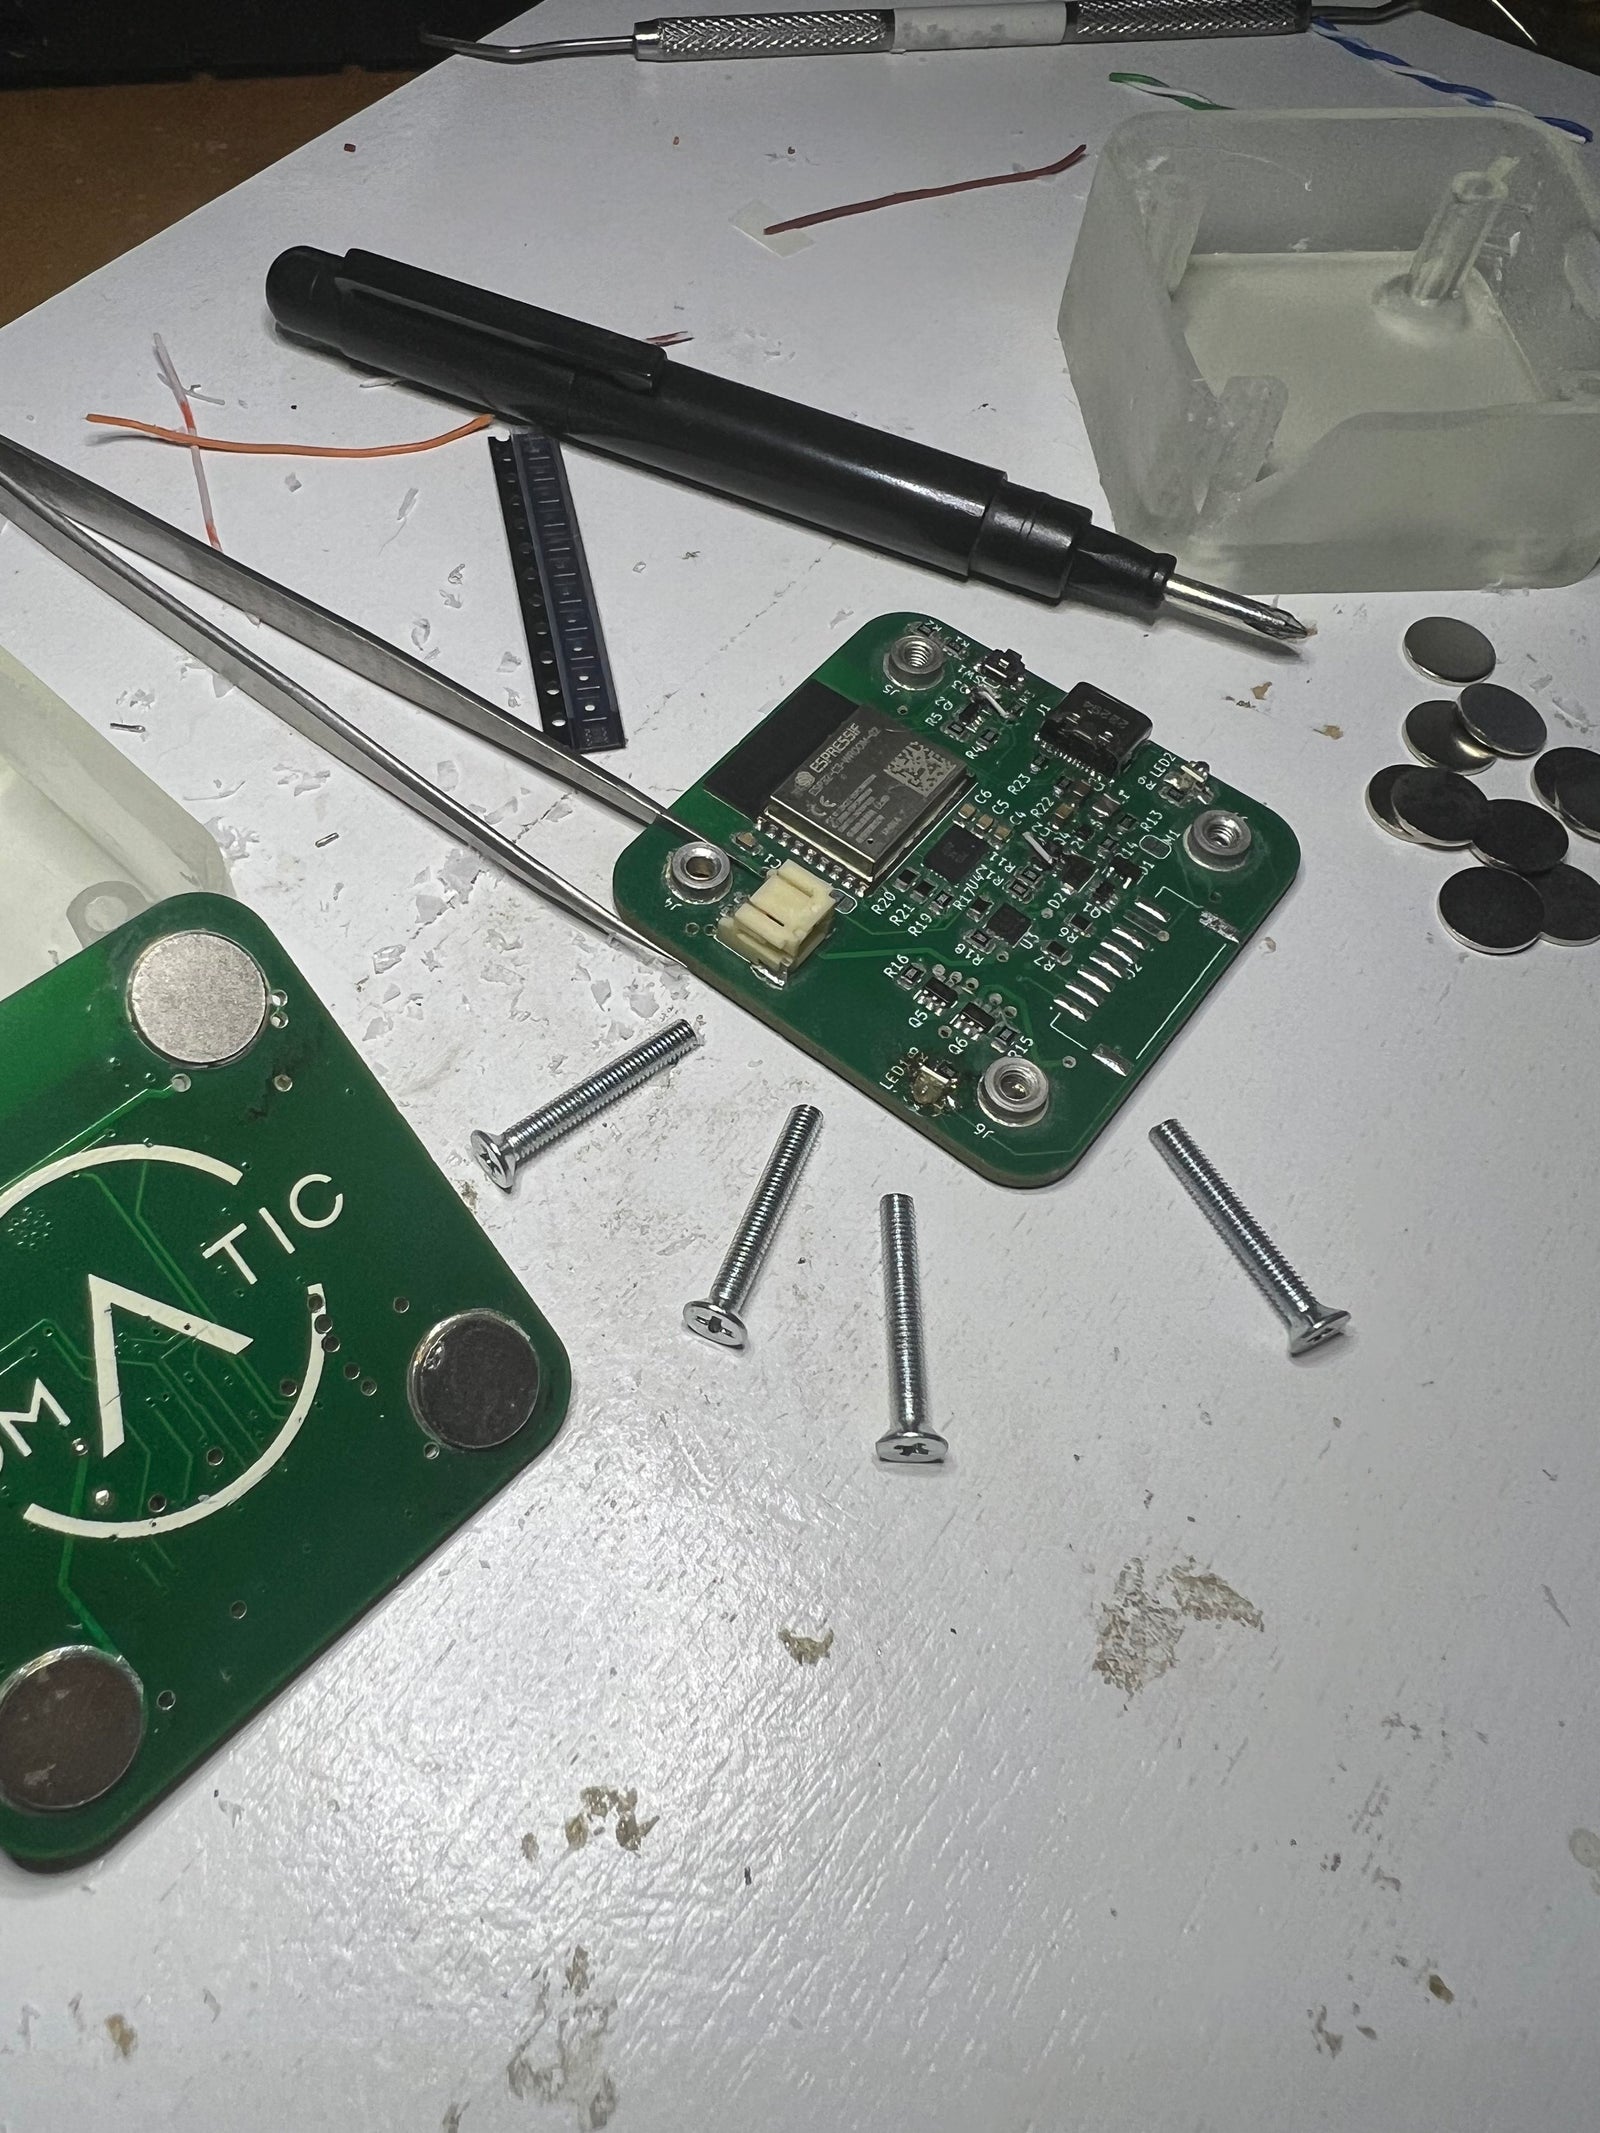 Somatic VR firmly believes in your right to be able to repair your electronic devices. We have designed each EROS tracker to be fully repairable by the end user without requiring an engineering degree. This image shows a few of the components from our initial Alpha prototype builds.